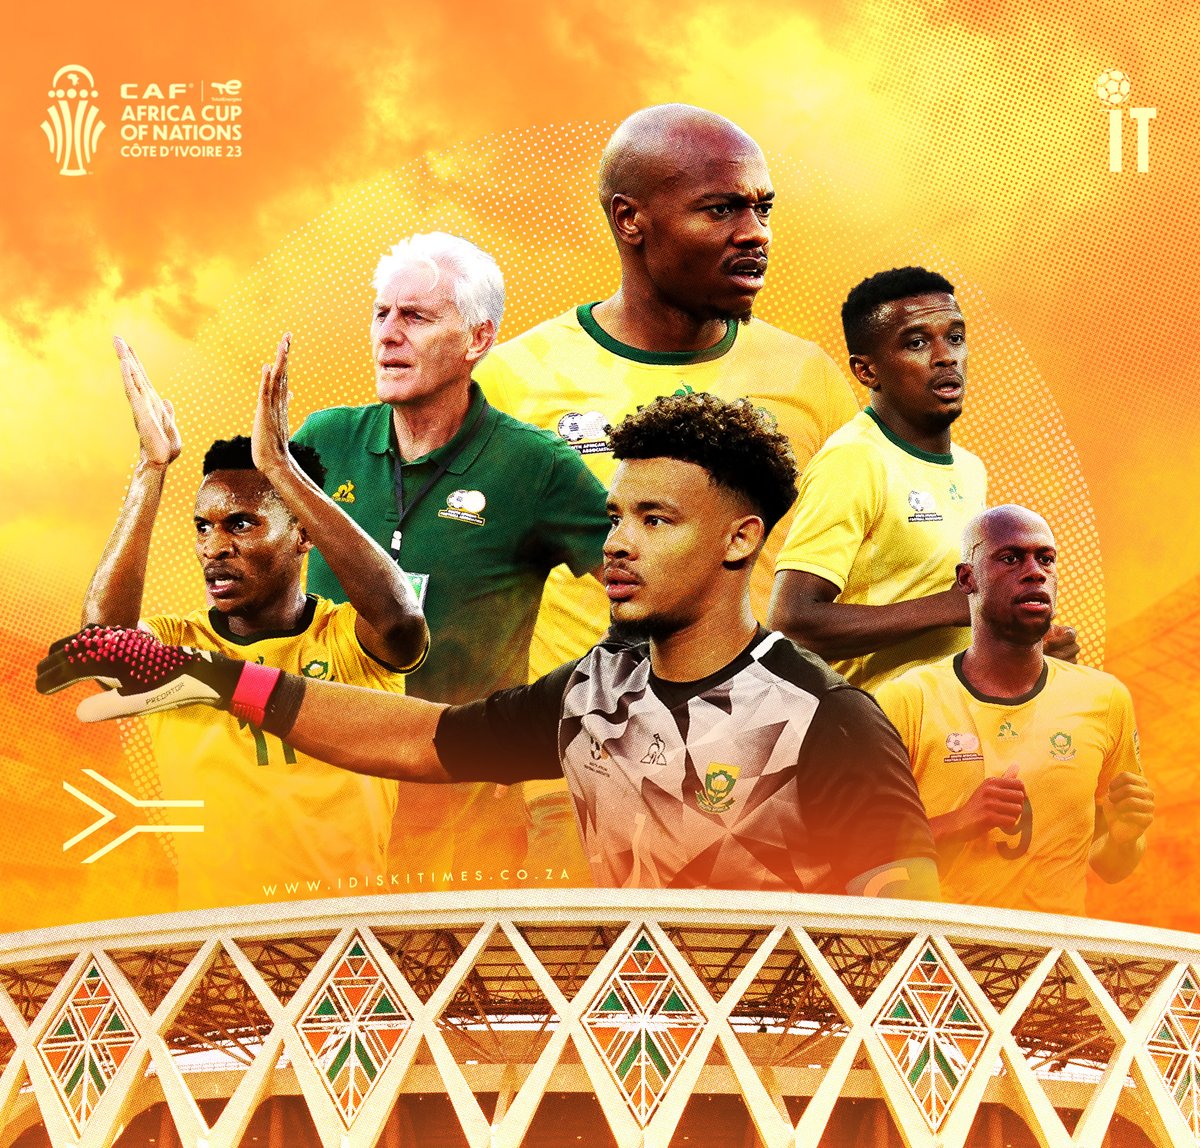 🇿🇦 𝗧𝗢𝗗𝗔𝗬 𝗪𝗘'𝗥𝗘 𝗔𝗟𝗟 𝗕𝗔𝗙𝗔𝗡𝗔 ‼️ REPOST, if you believe our boys can reach the semi-finals today. #TotalEnergiesAFCON2023